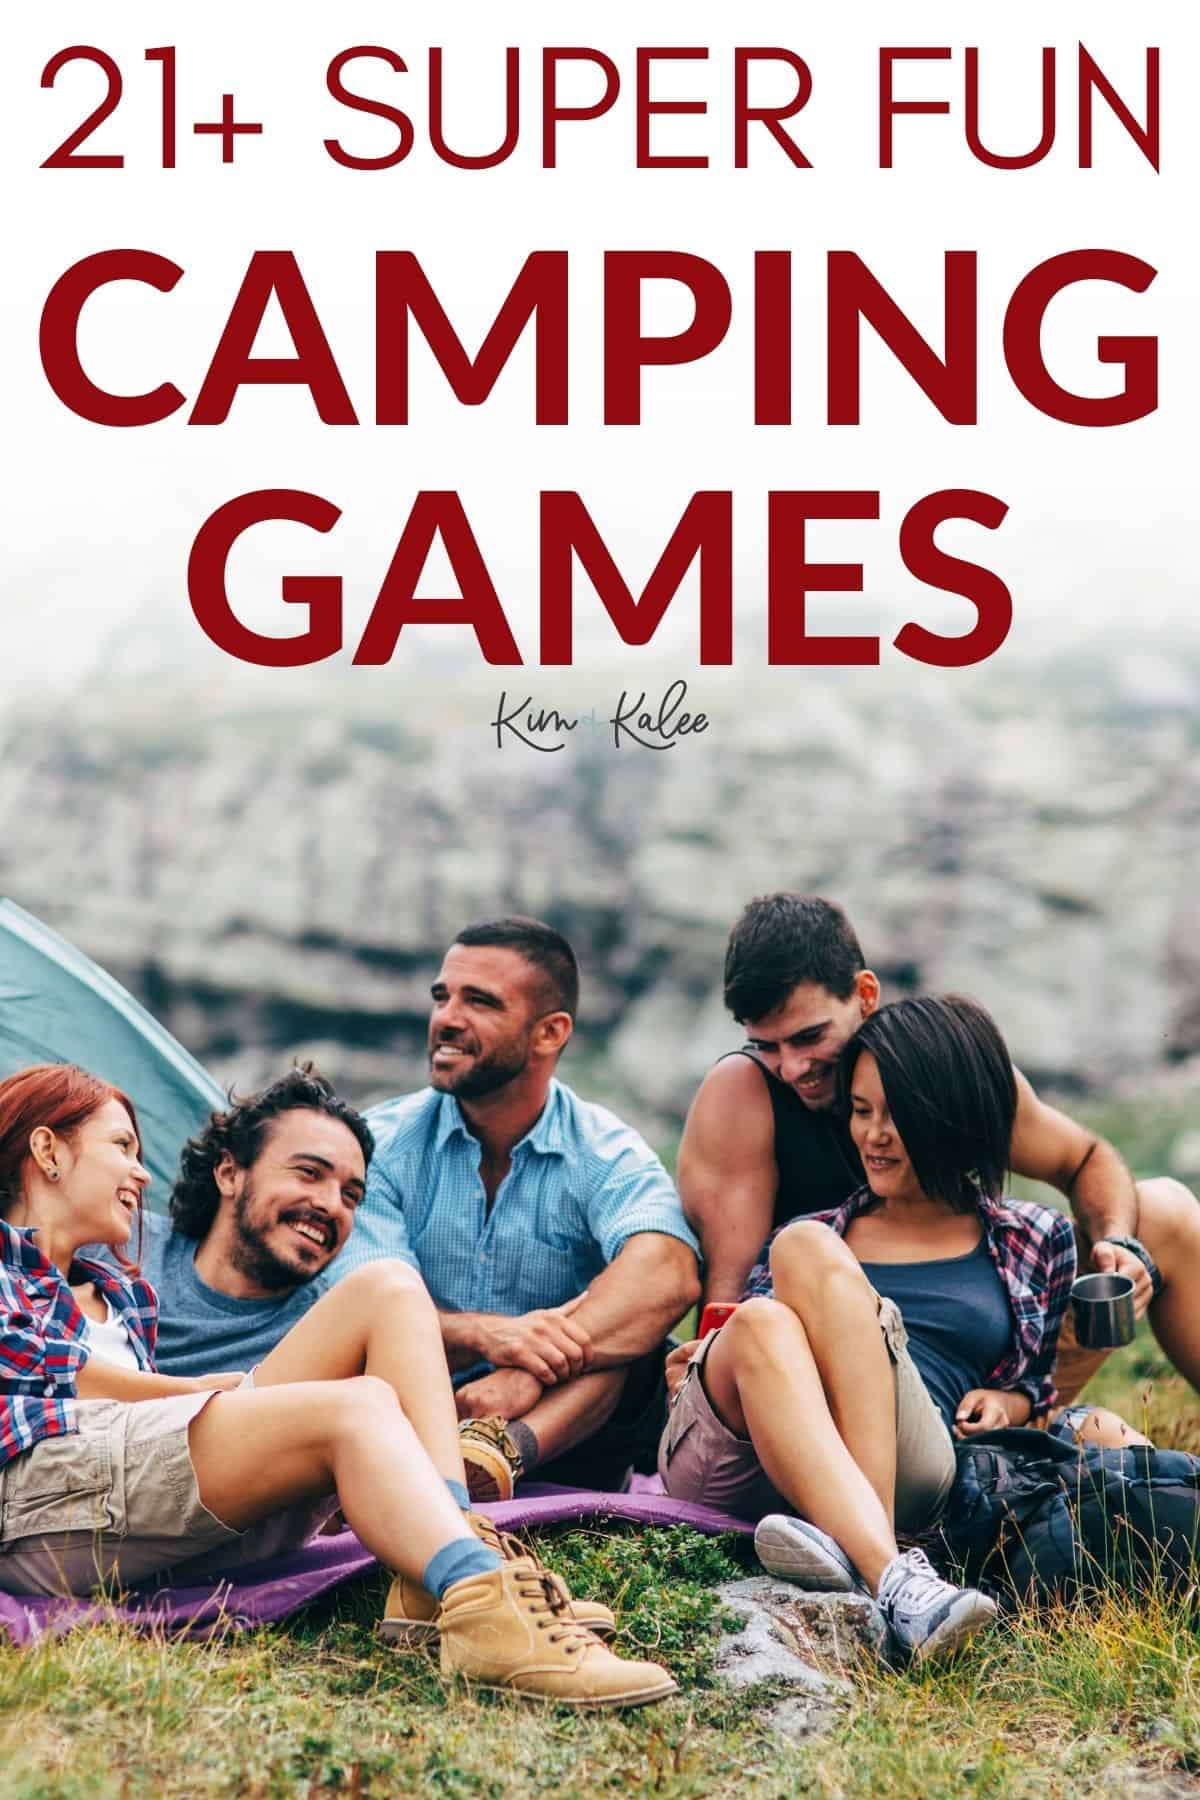 friends with text overlay "21+ super fun camping games"